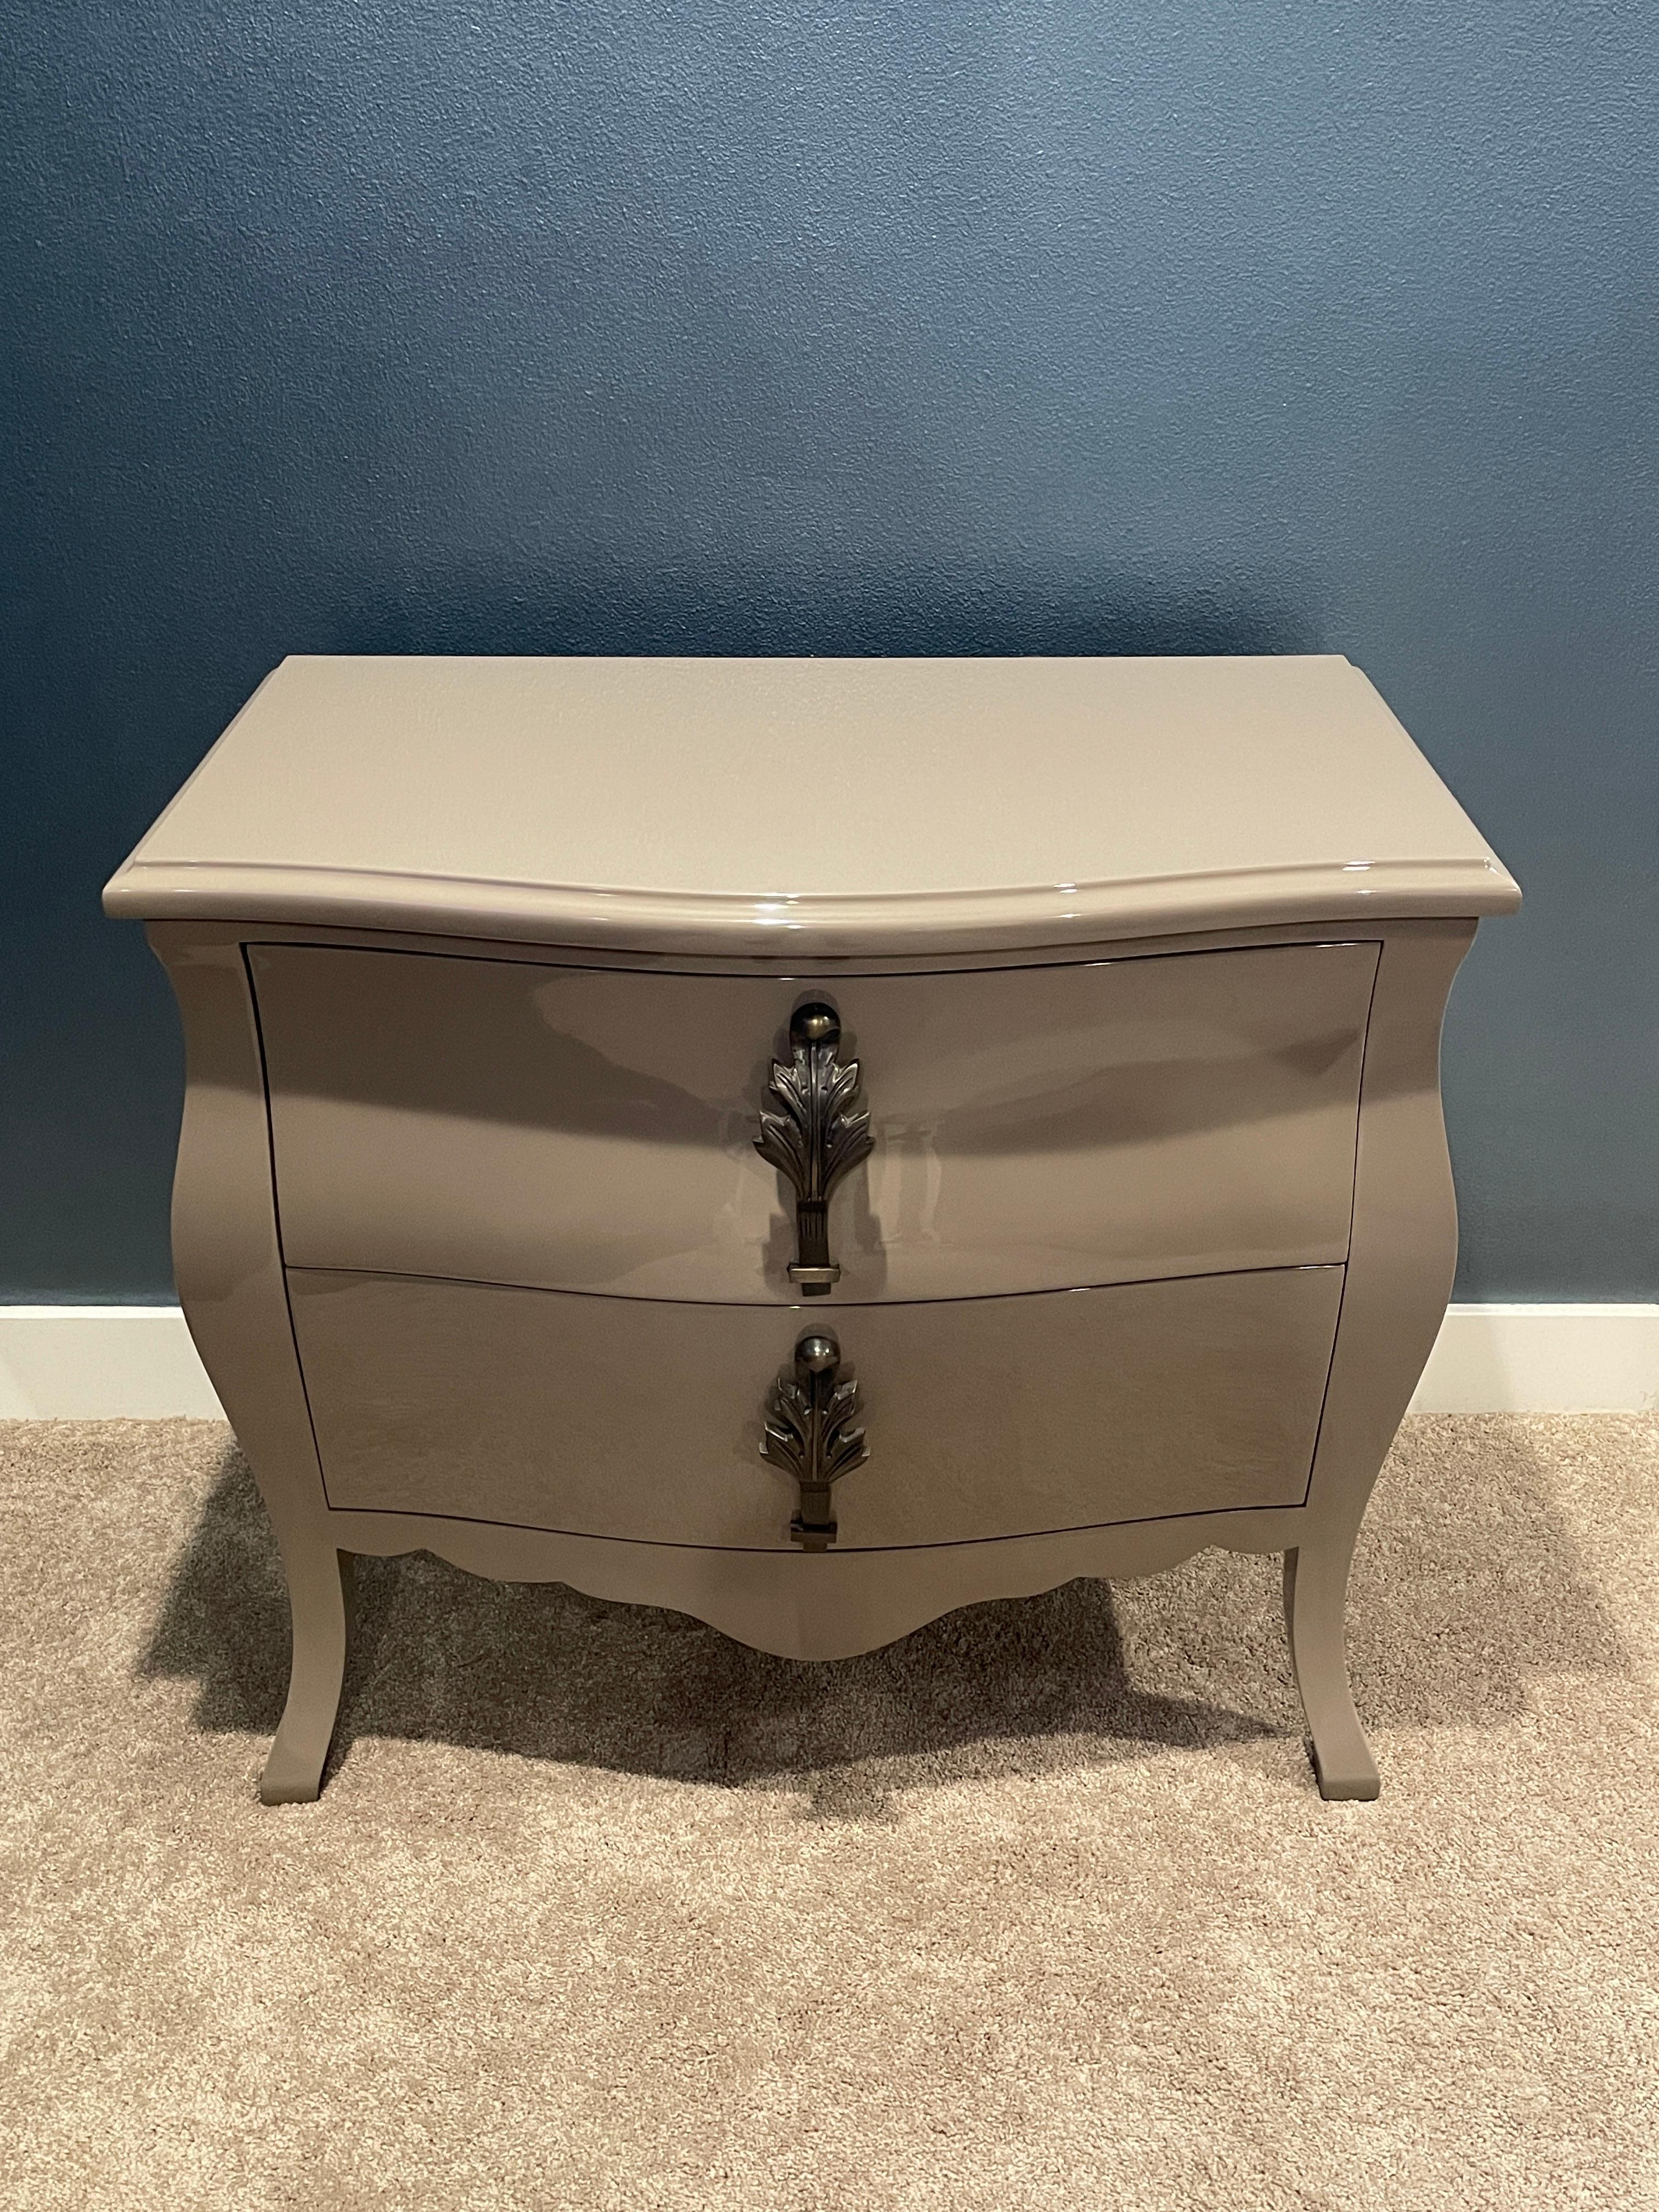 This gorgeous paid of vintage inspired French lacquer side tables in finished in hand-laid Inca Grey French lacquer with Rodin Patina solid bronze pulls.  These pieces were produced less than a year ago and stored in Jean de Merry's LA warehouse. 